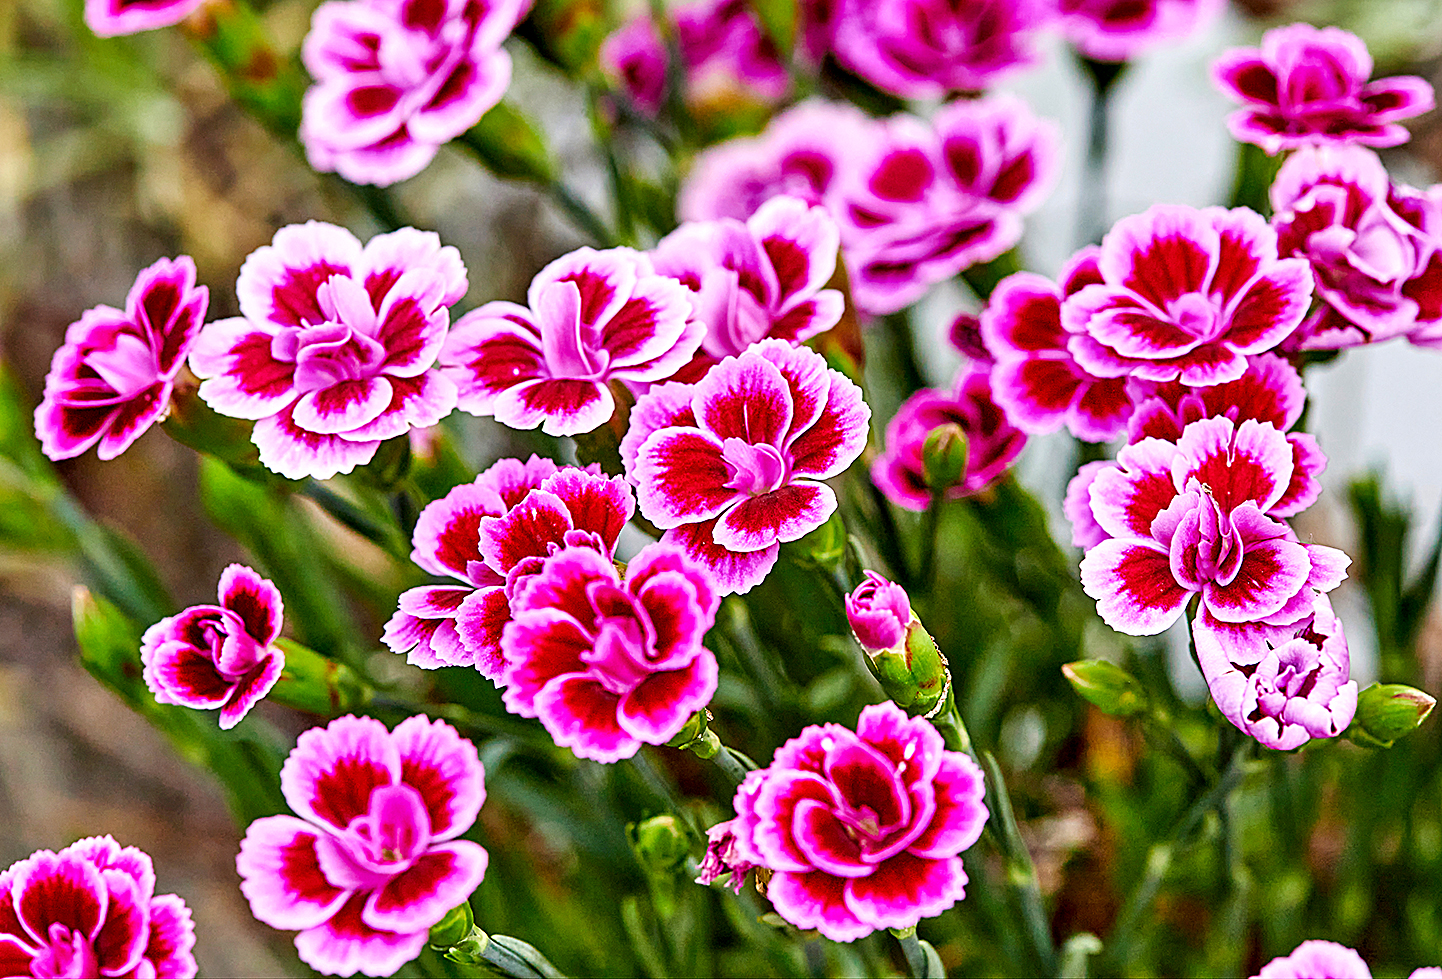 Macro shot of vibrant pink carnations (Dianthus caryophyllus) in the garden.